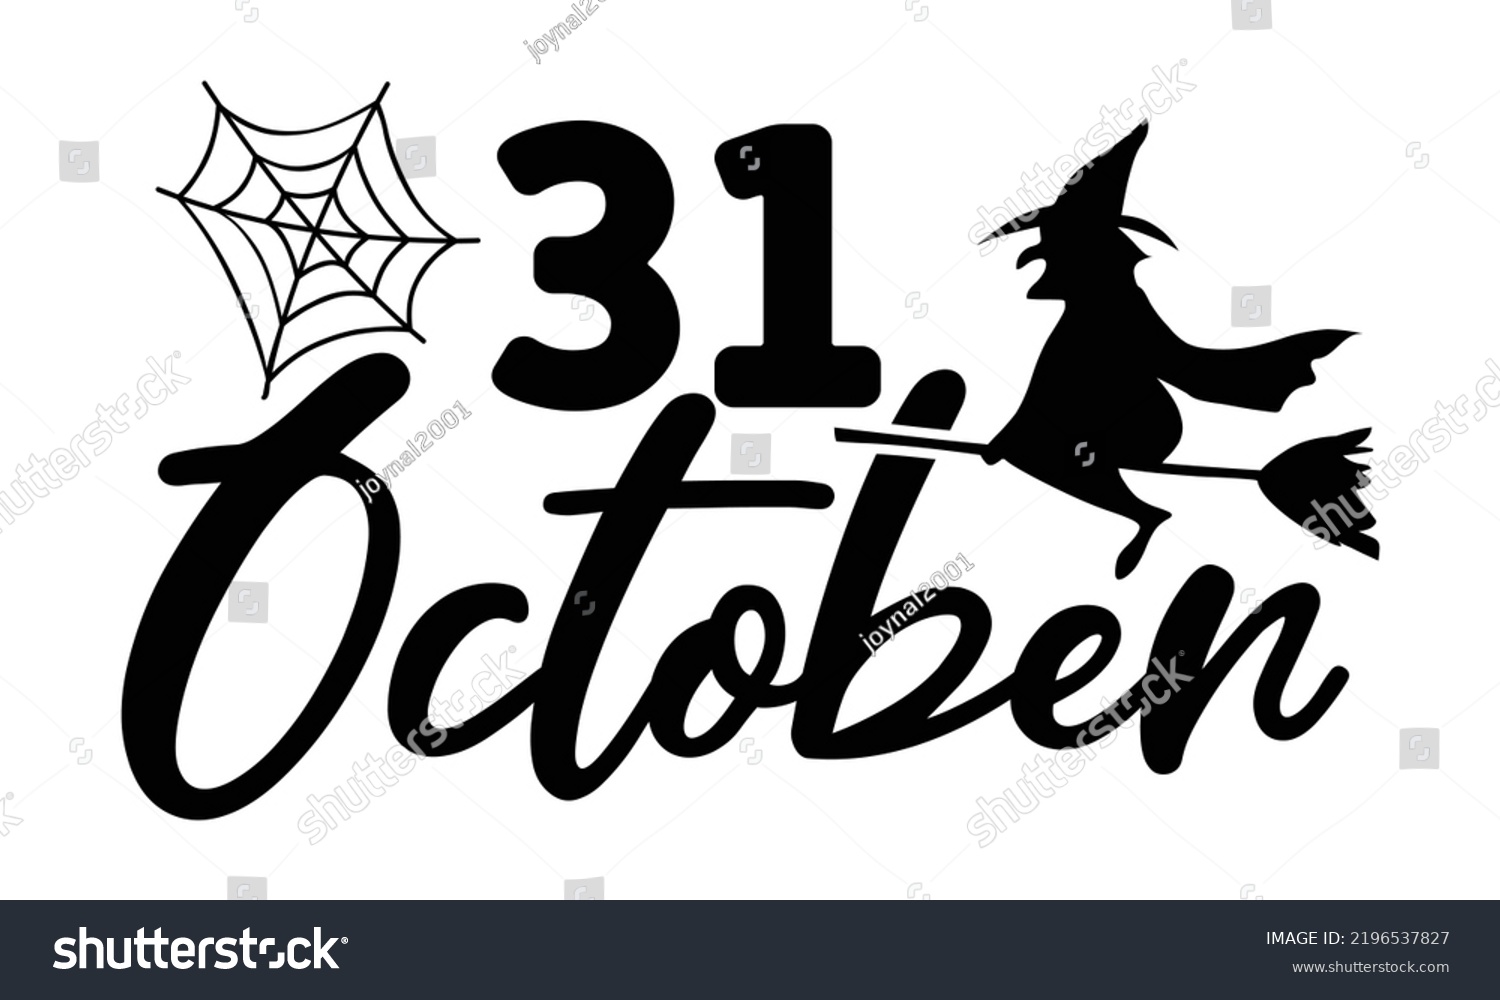 SVG of Halloween quotes SVG cut files Design, Halloween quotes t shirt designs Template svg